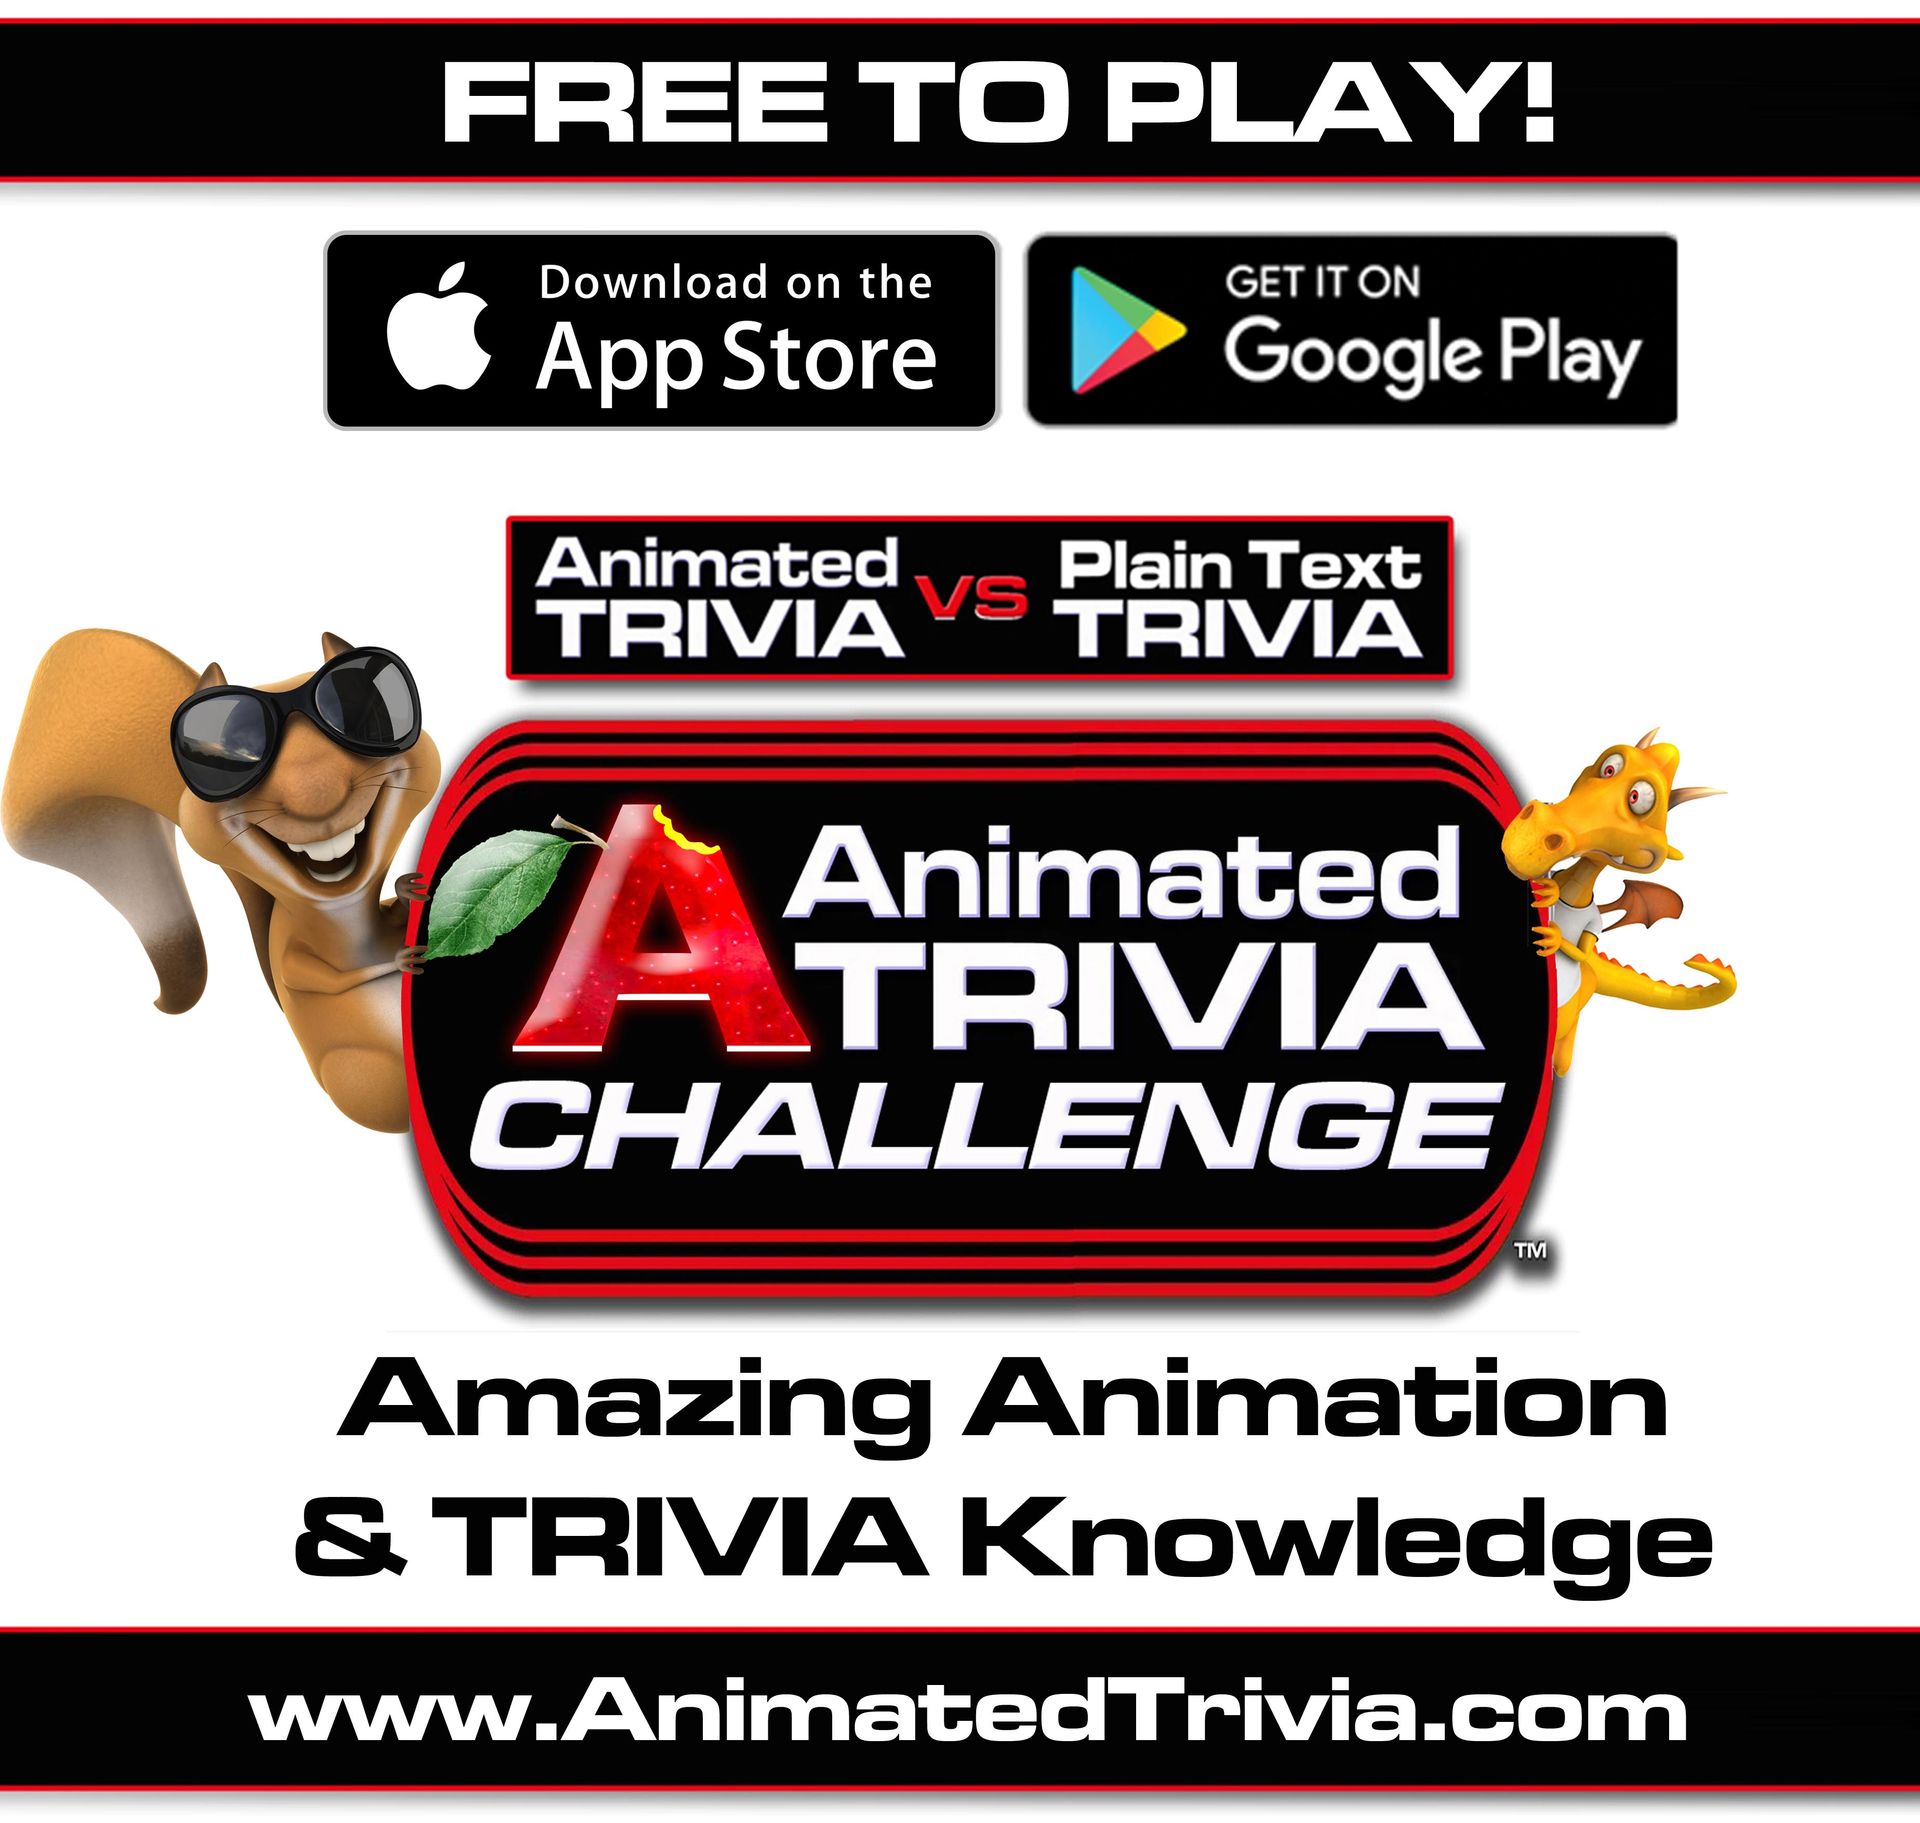 Animated Trivia Challenge Series by Steve Stark - Inventor of Spin Pro - PlaySpinPro.com